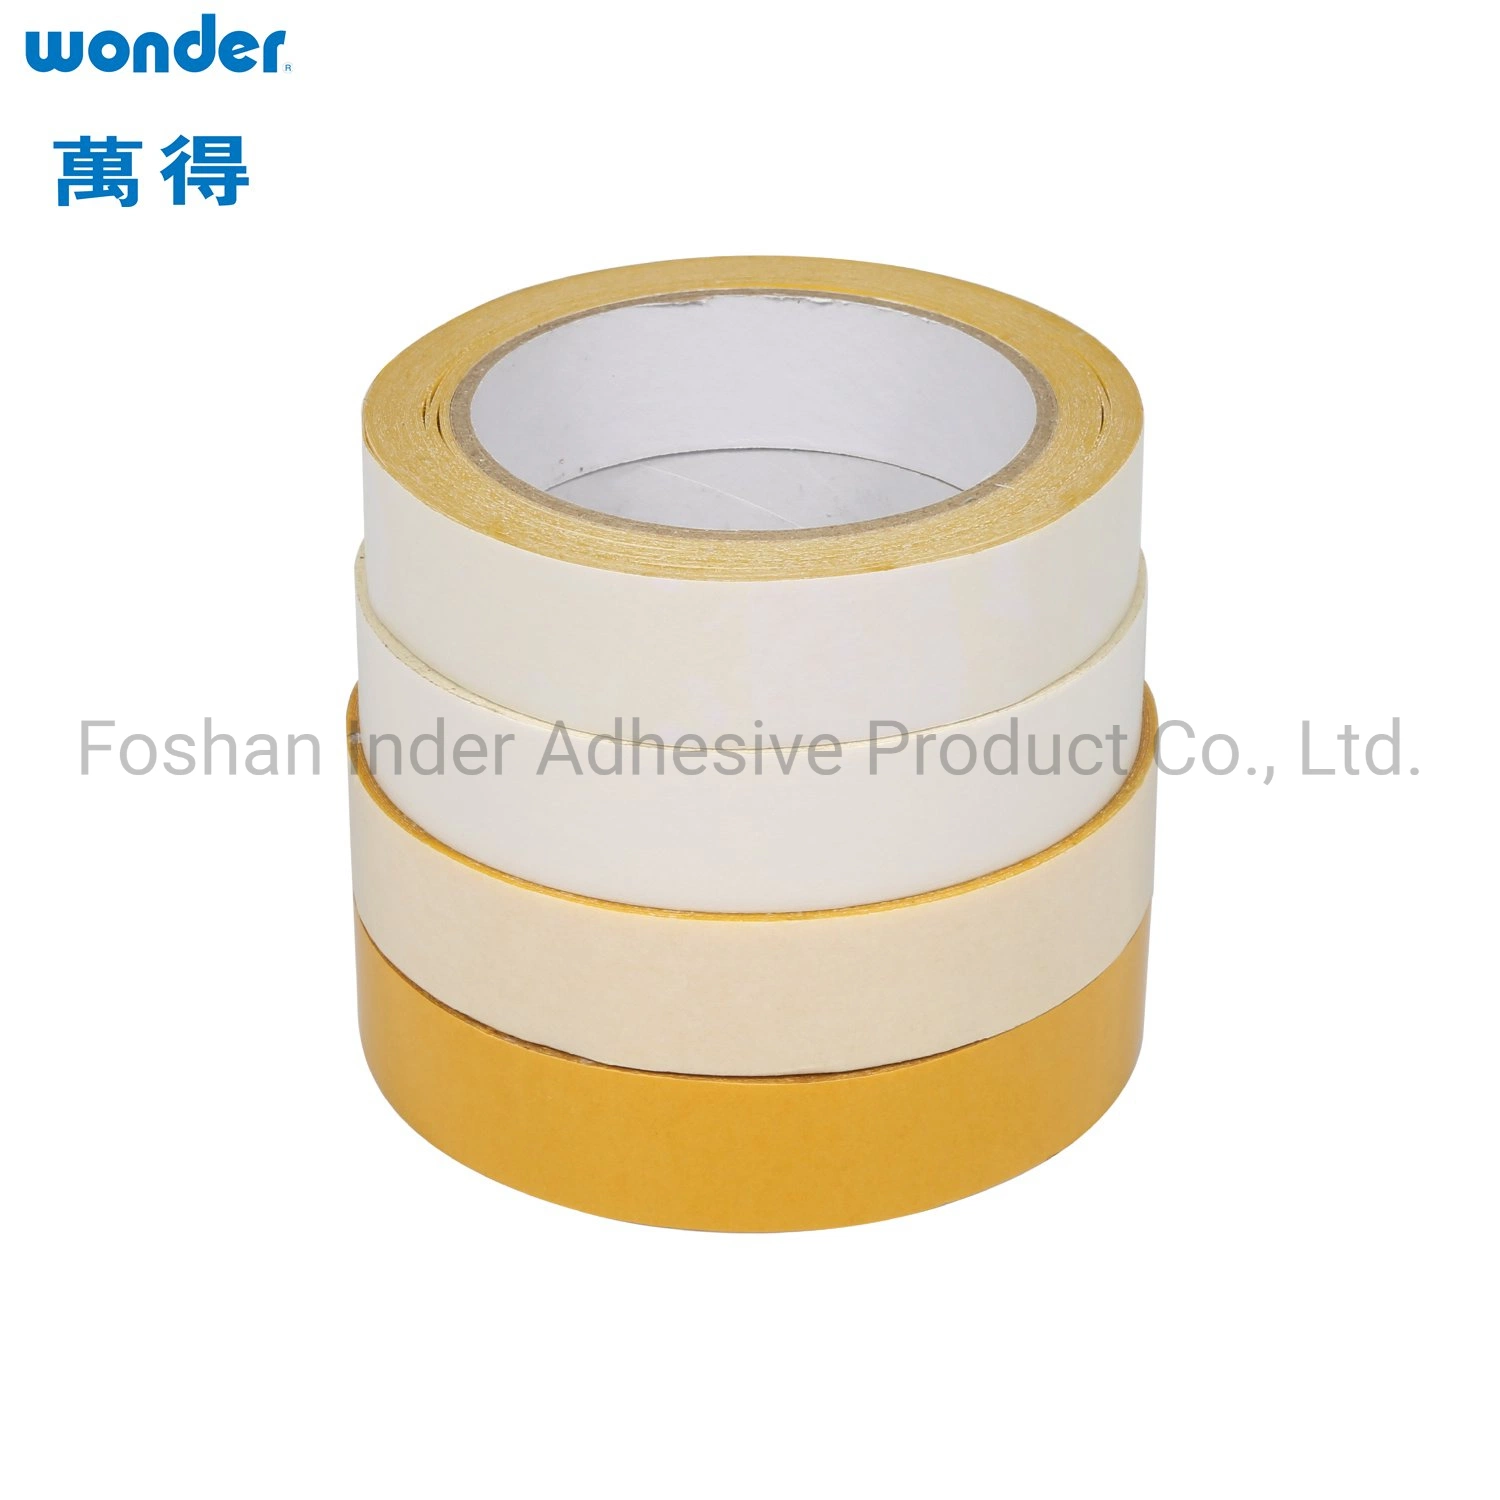 Self Adhesive Water Based Double Sided Tissue Tape - Well Known Wonder Brand